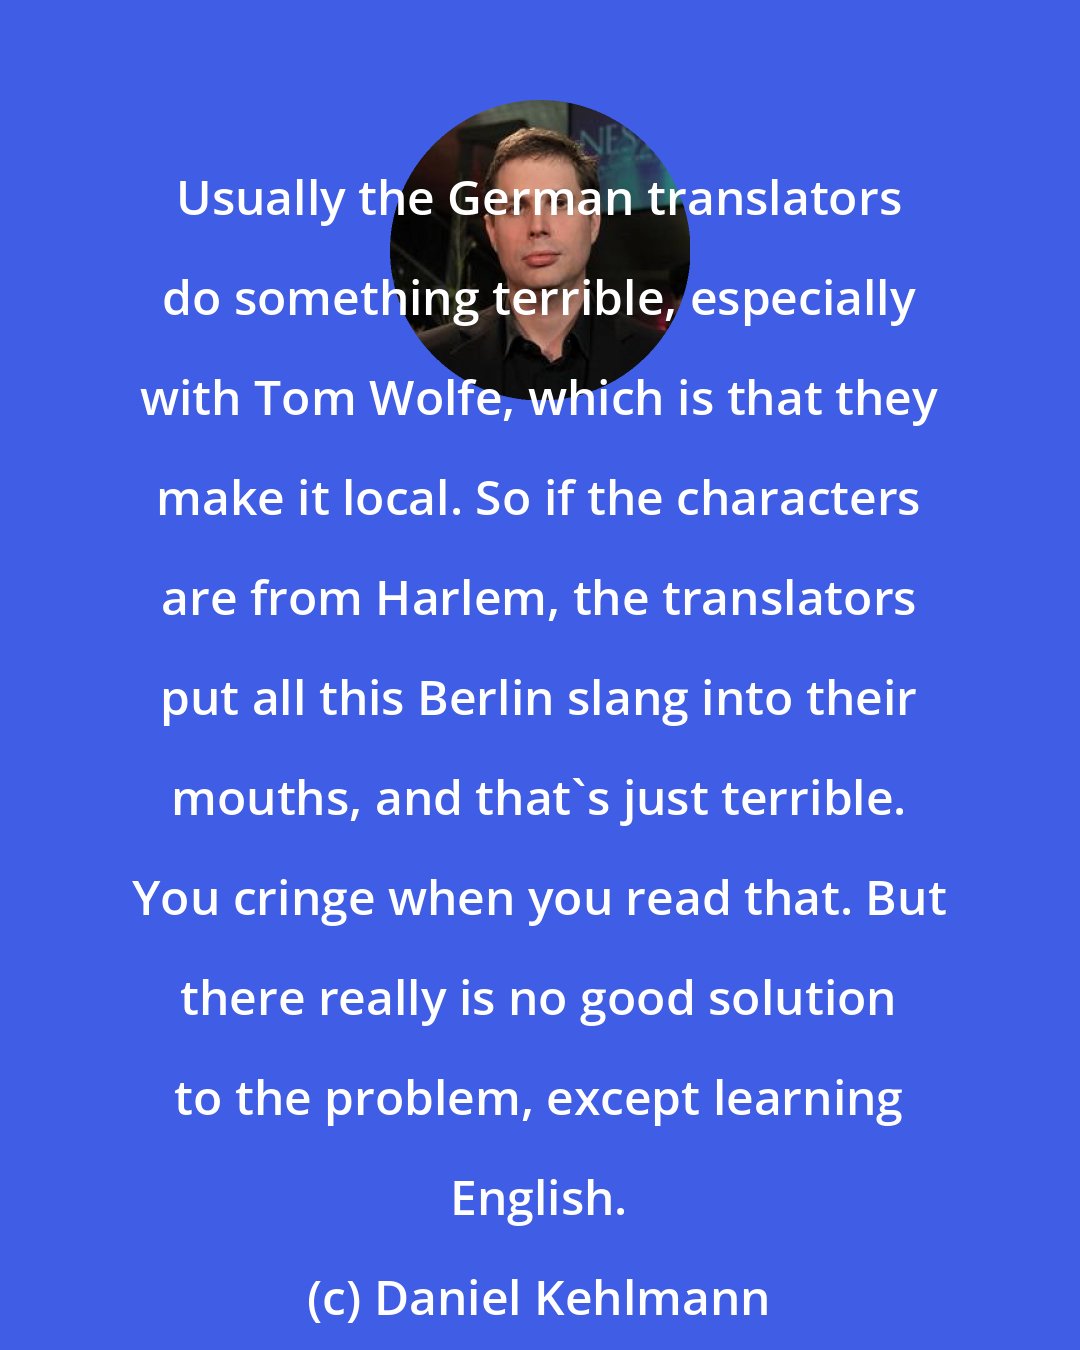 Daniel Kehlmann: Usually the German translators do something terrible, especially with Tom Wolfe, which is that they make it local. So if the characters are from Harlem, the translators put all this Berlin slang into their mouths, and that's just terrible. You cringe when you read that. But there really is no good solution to the problem, except learning English.